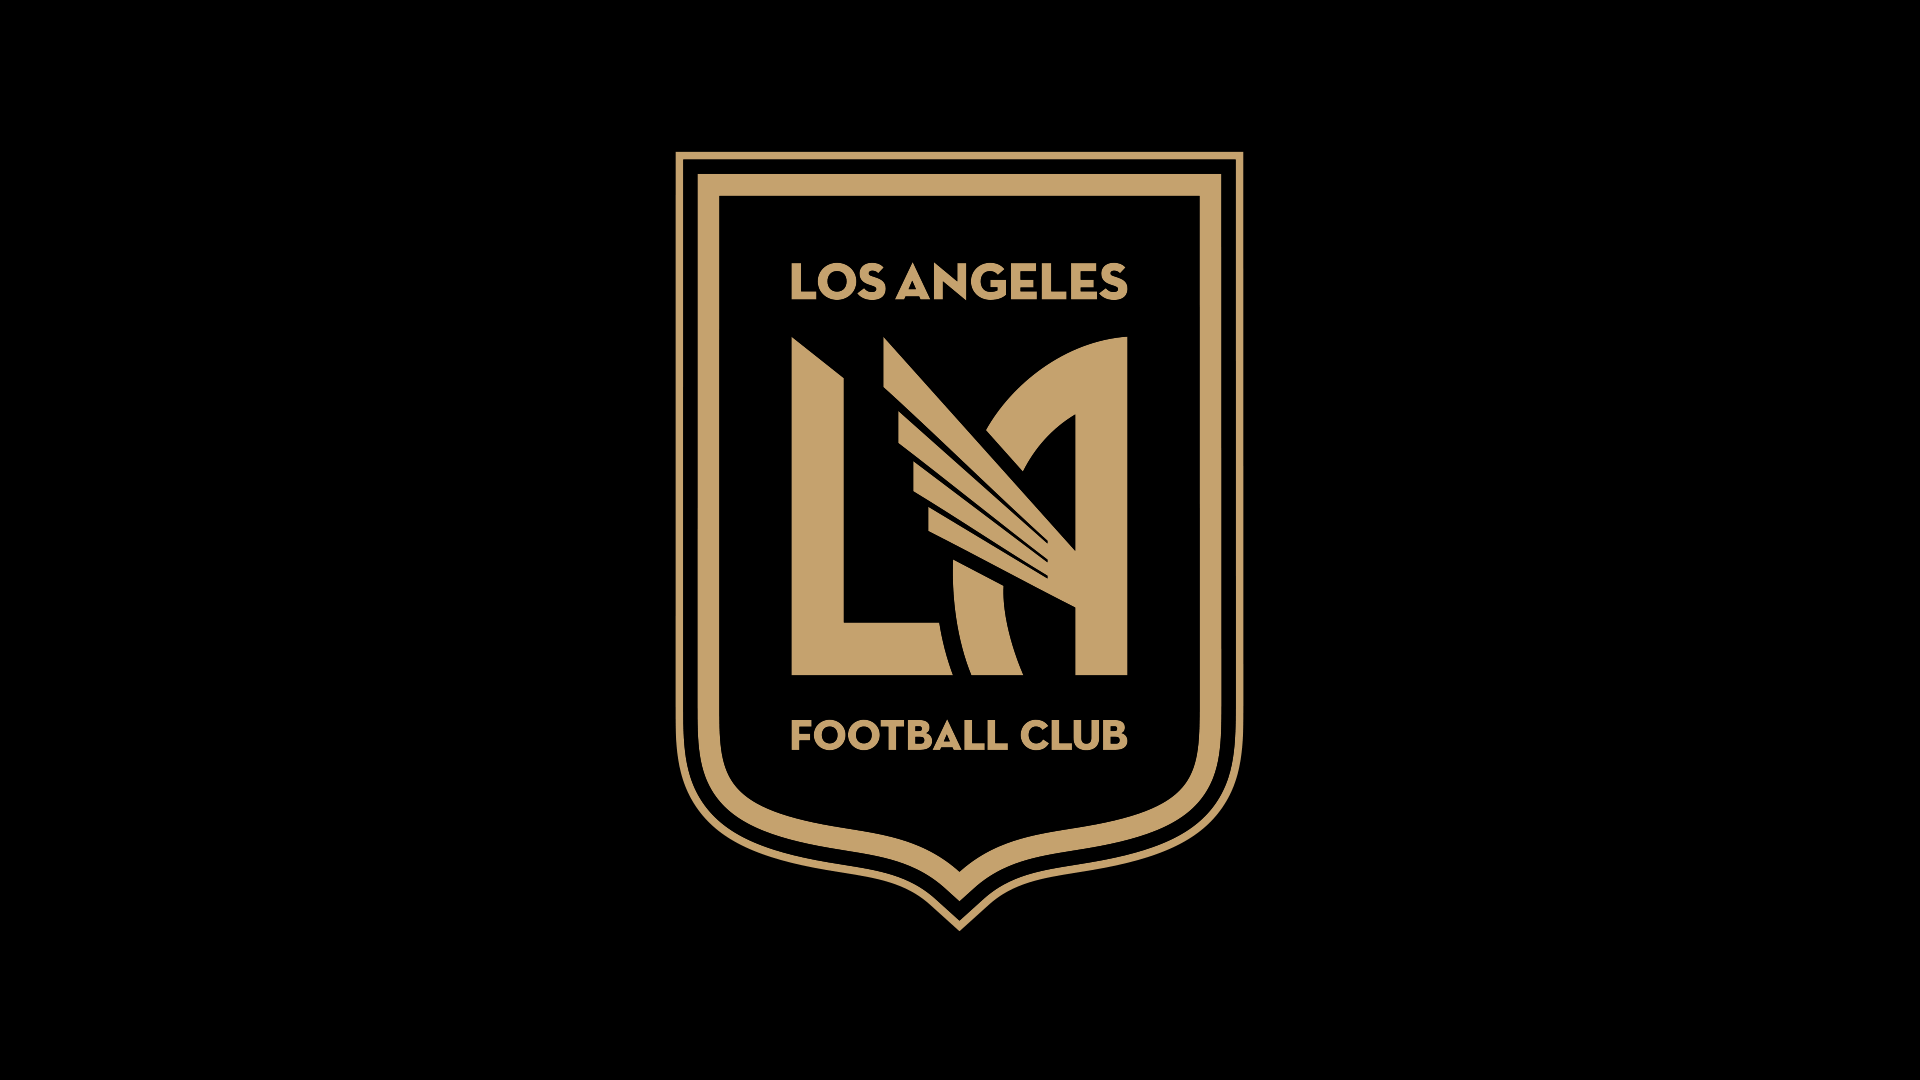 LAFC teams up with LA Works and the Palos Verdes Peninsula Land Conservancy (PVPLC) to host a day of service